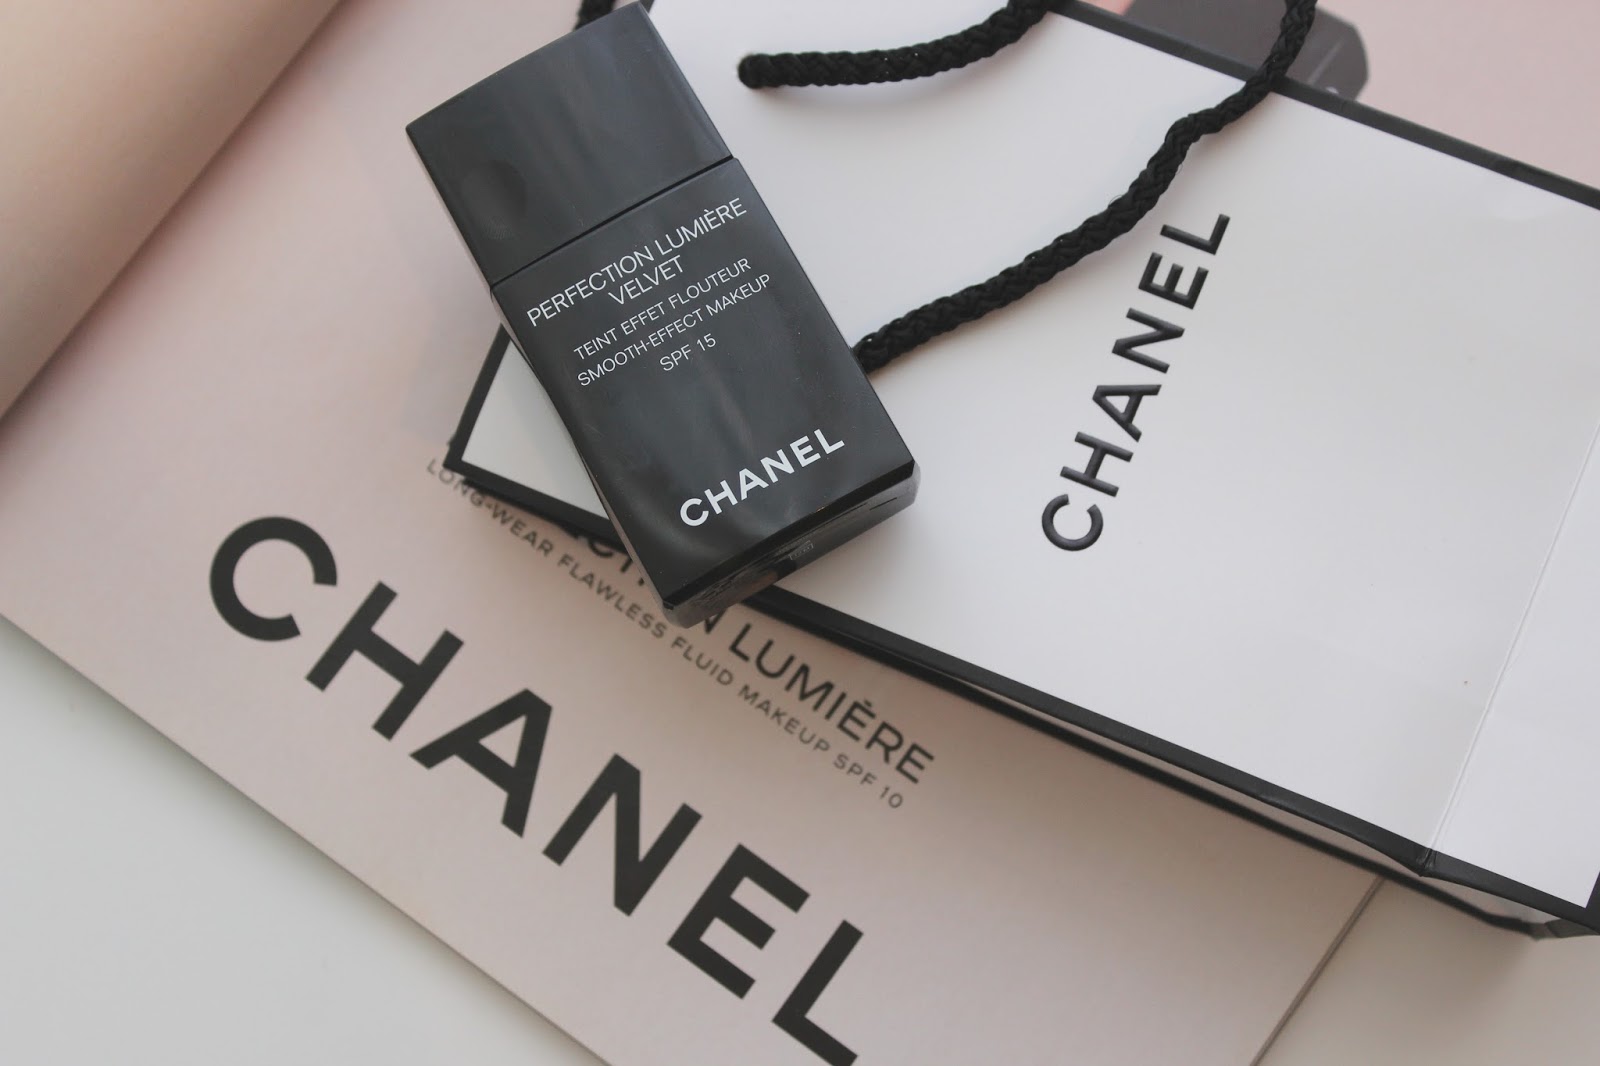 chanel perfection lumiere foundation